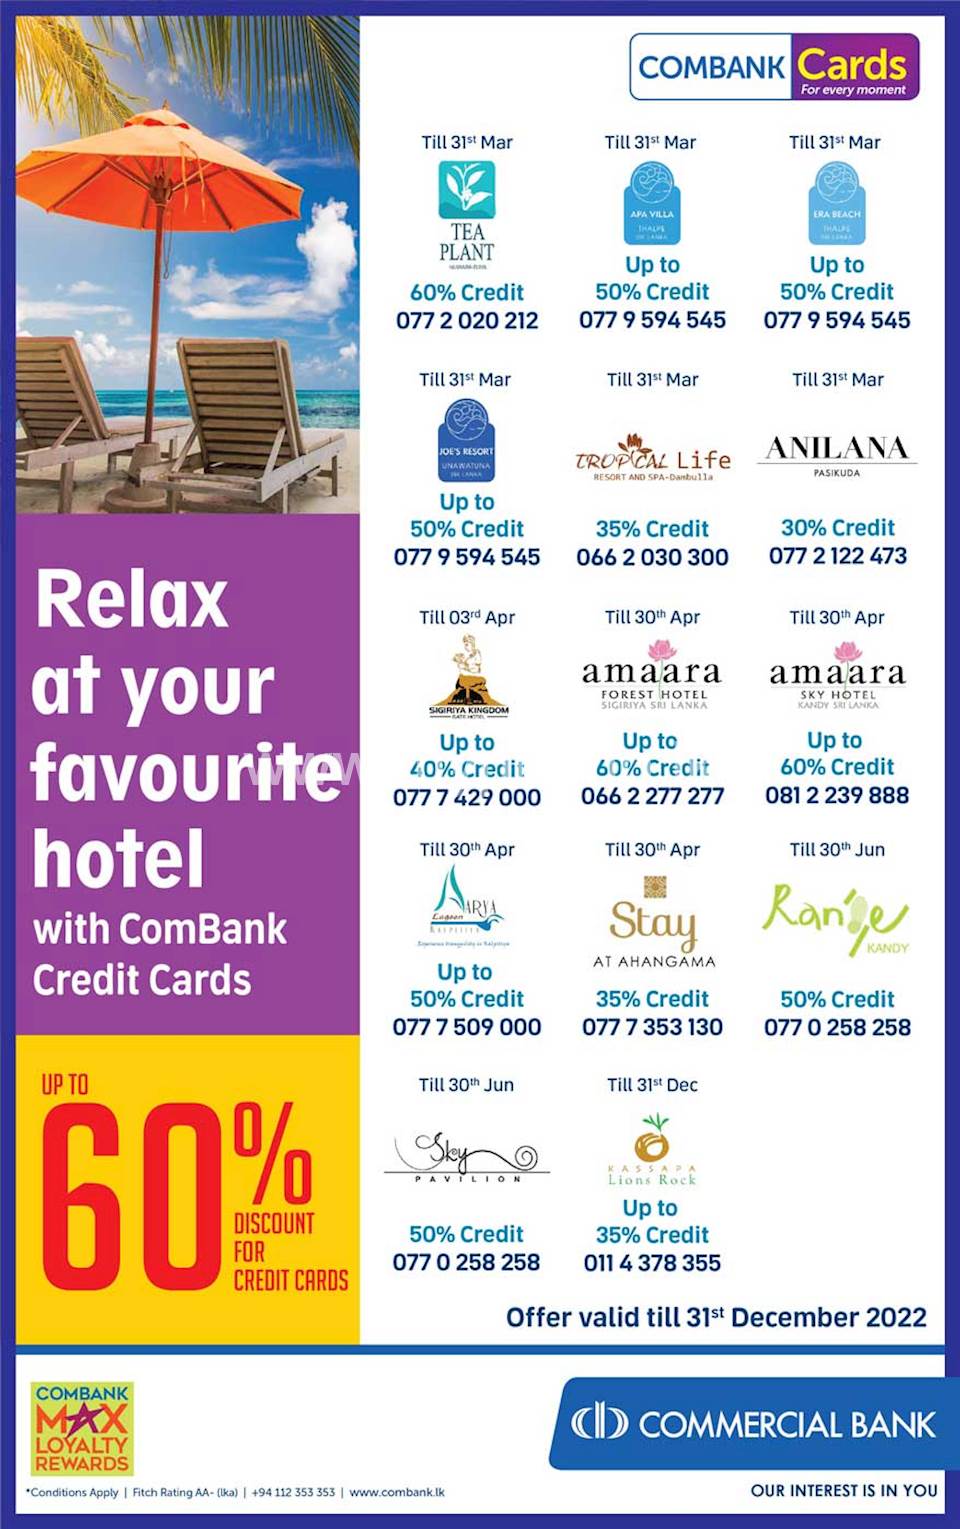 Relax at your favourite hotel with ComBank Credit Cards